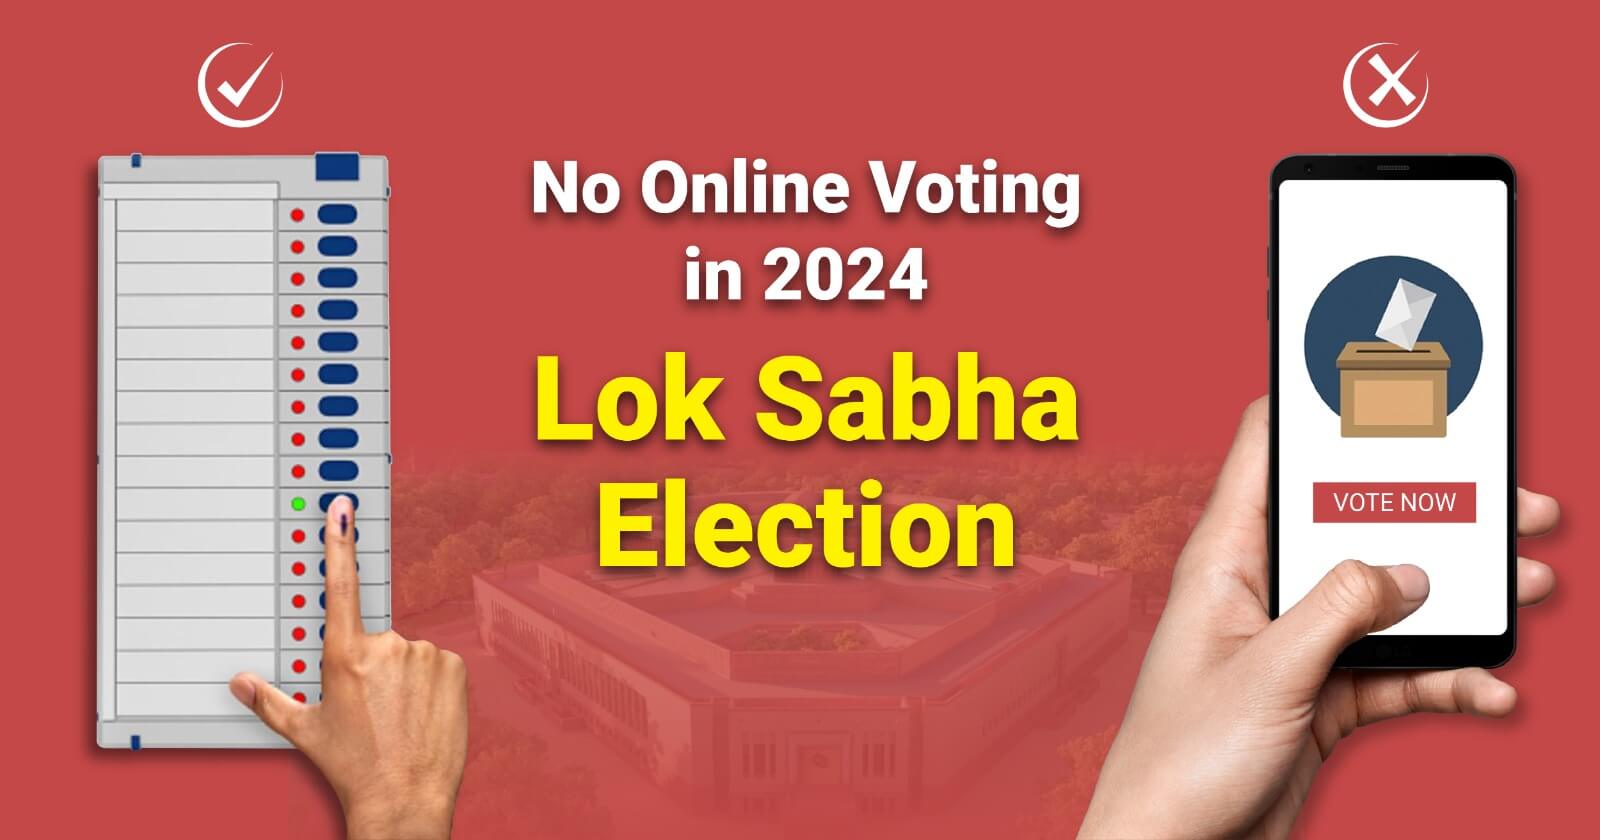 Online voting is not allowed in Lok Sabha Election 2024 – WHY? - Right2Vote